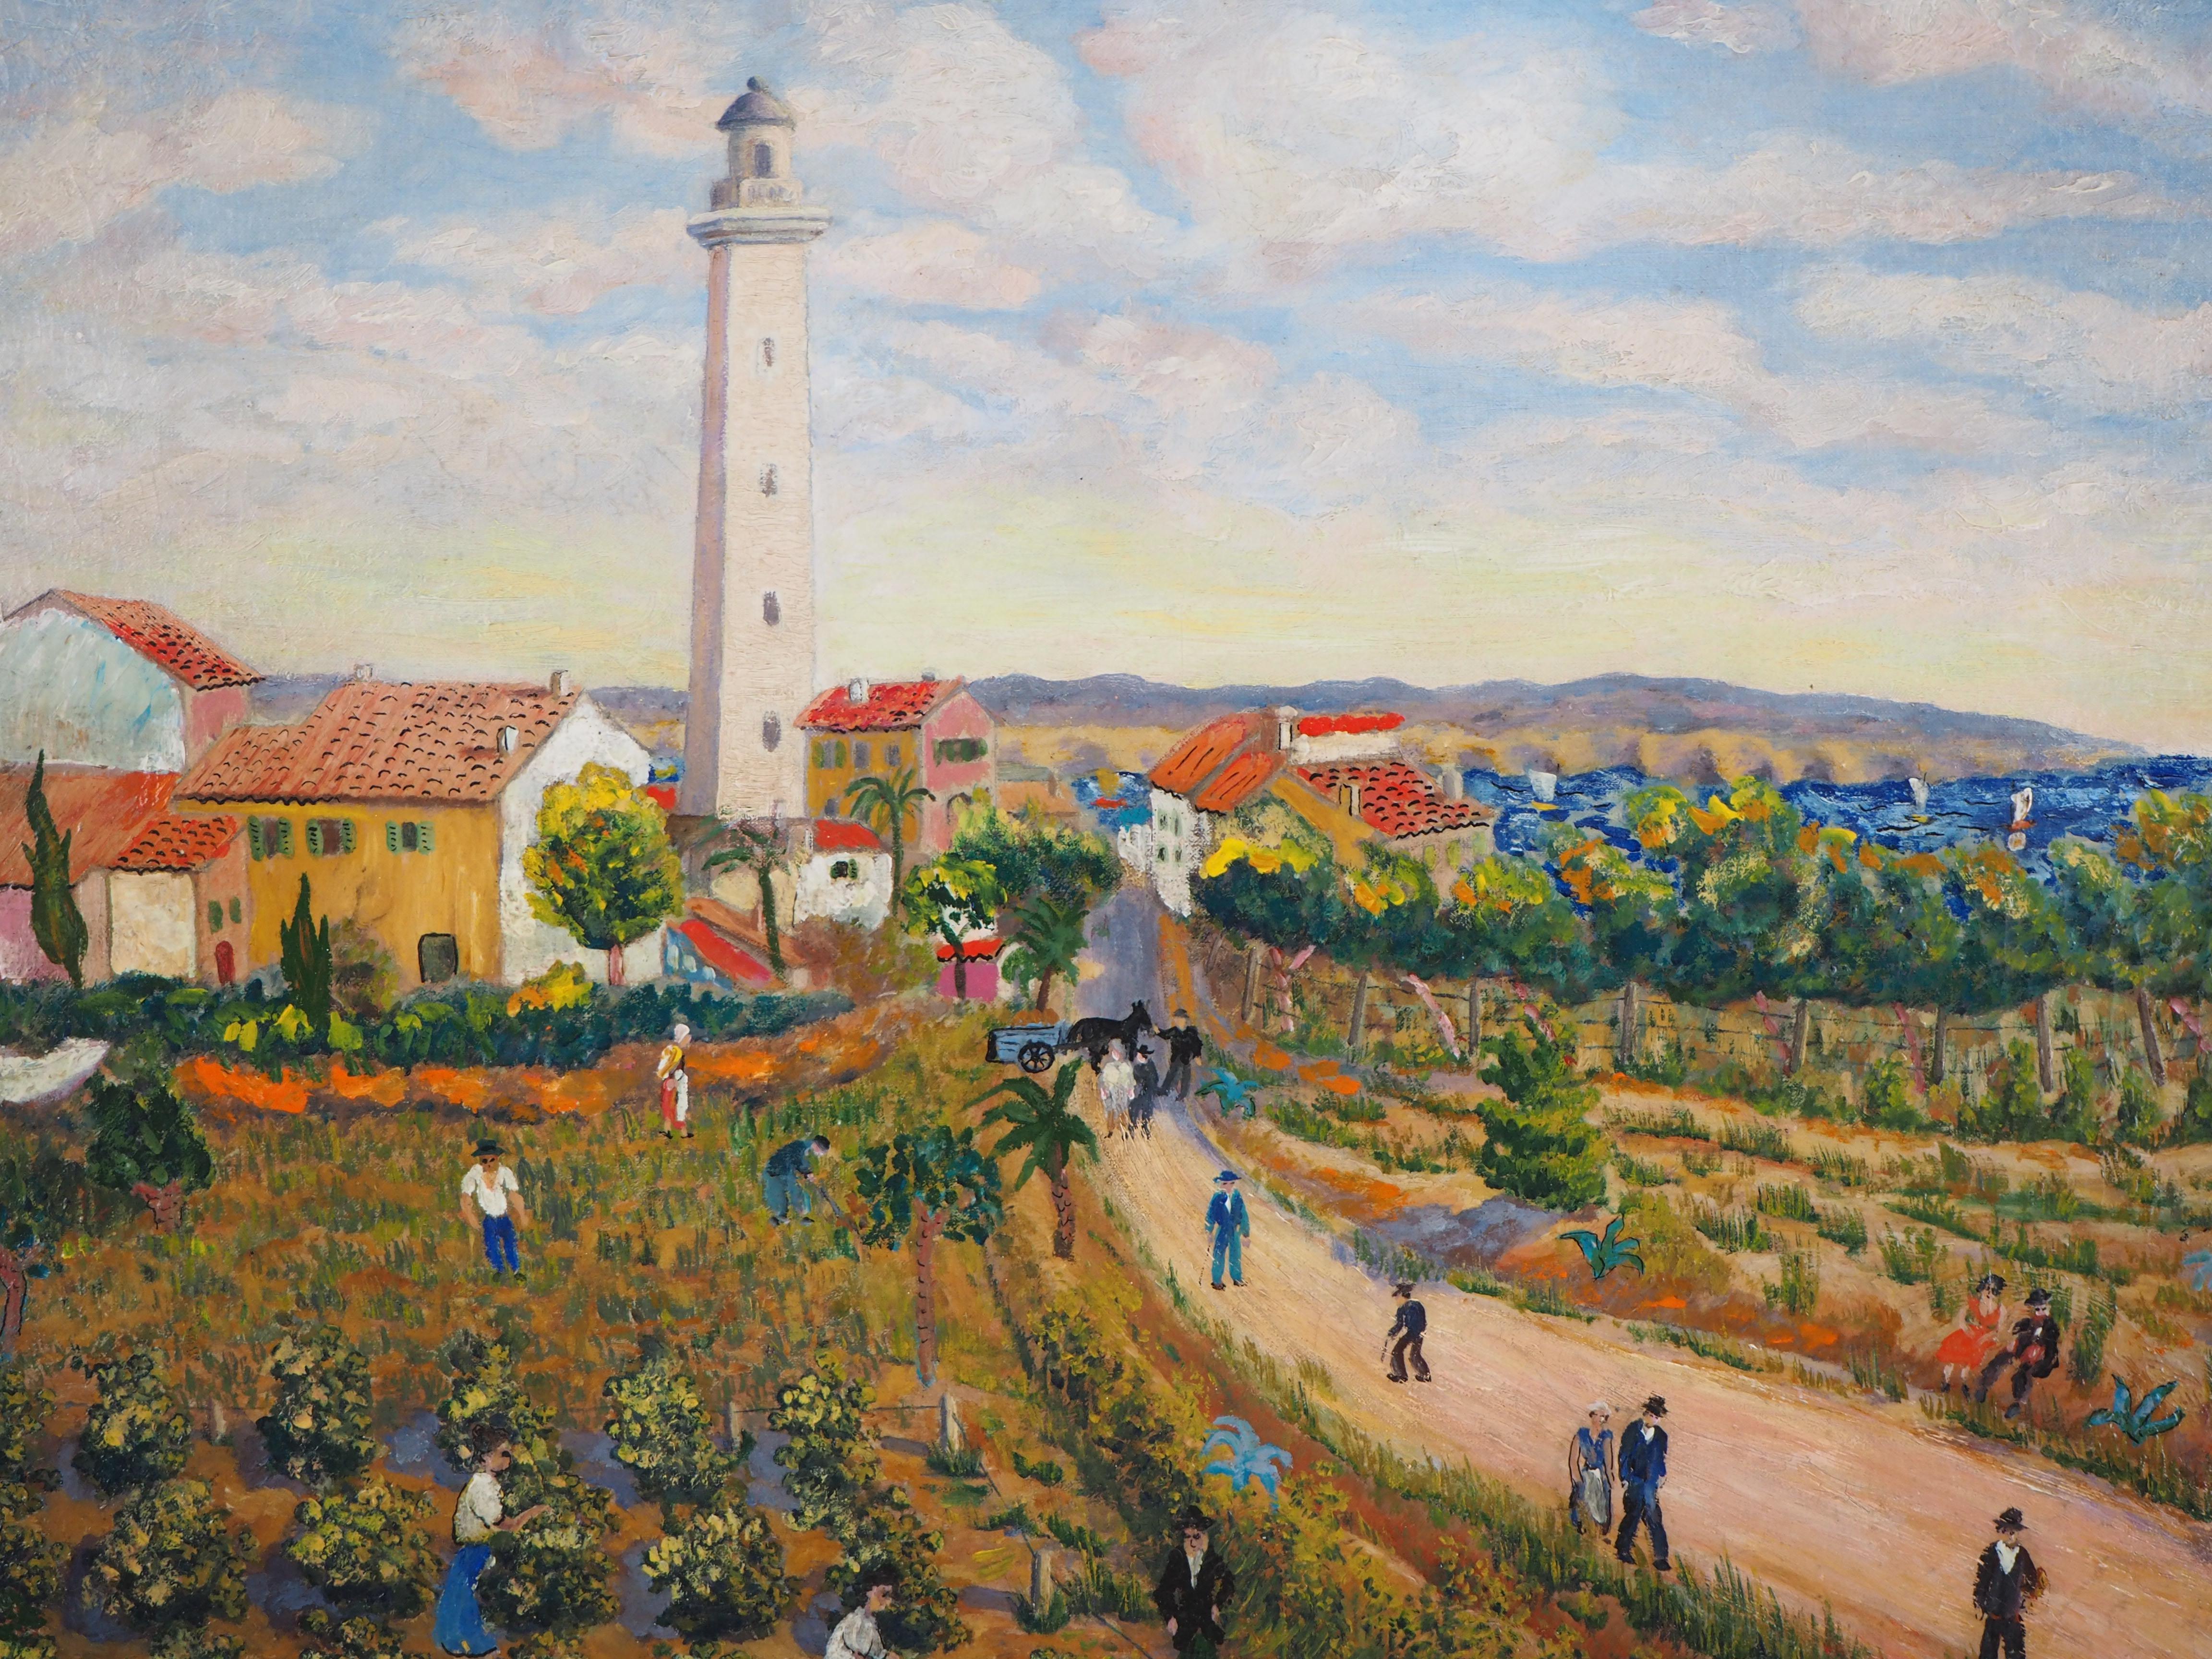 Elisee MACLET
Landscape with a Lighthouse, c. 1930

Original oil on canvas
Handsigned bottom right
On canvas 50 x 65 cm at view (c. 20 x 26 inch)
Presented in a golden wood frame c. 75 x 95 cm (c. 30 x 38 in)

Very good condition, light uses to the